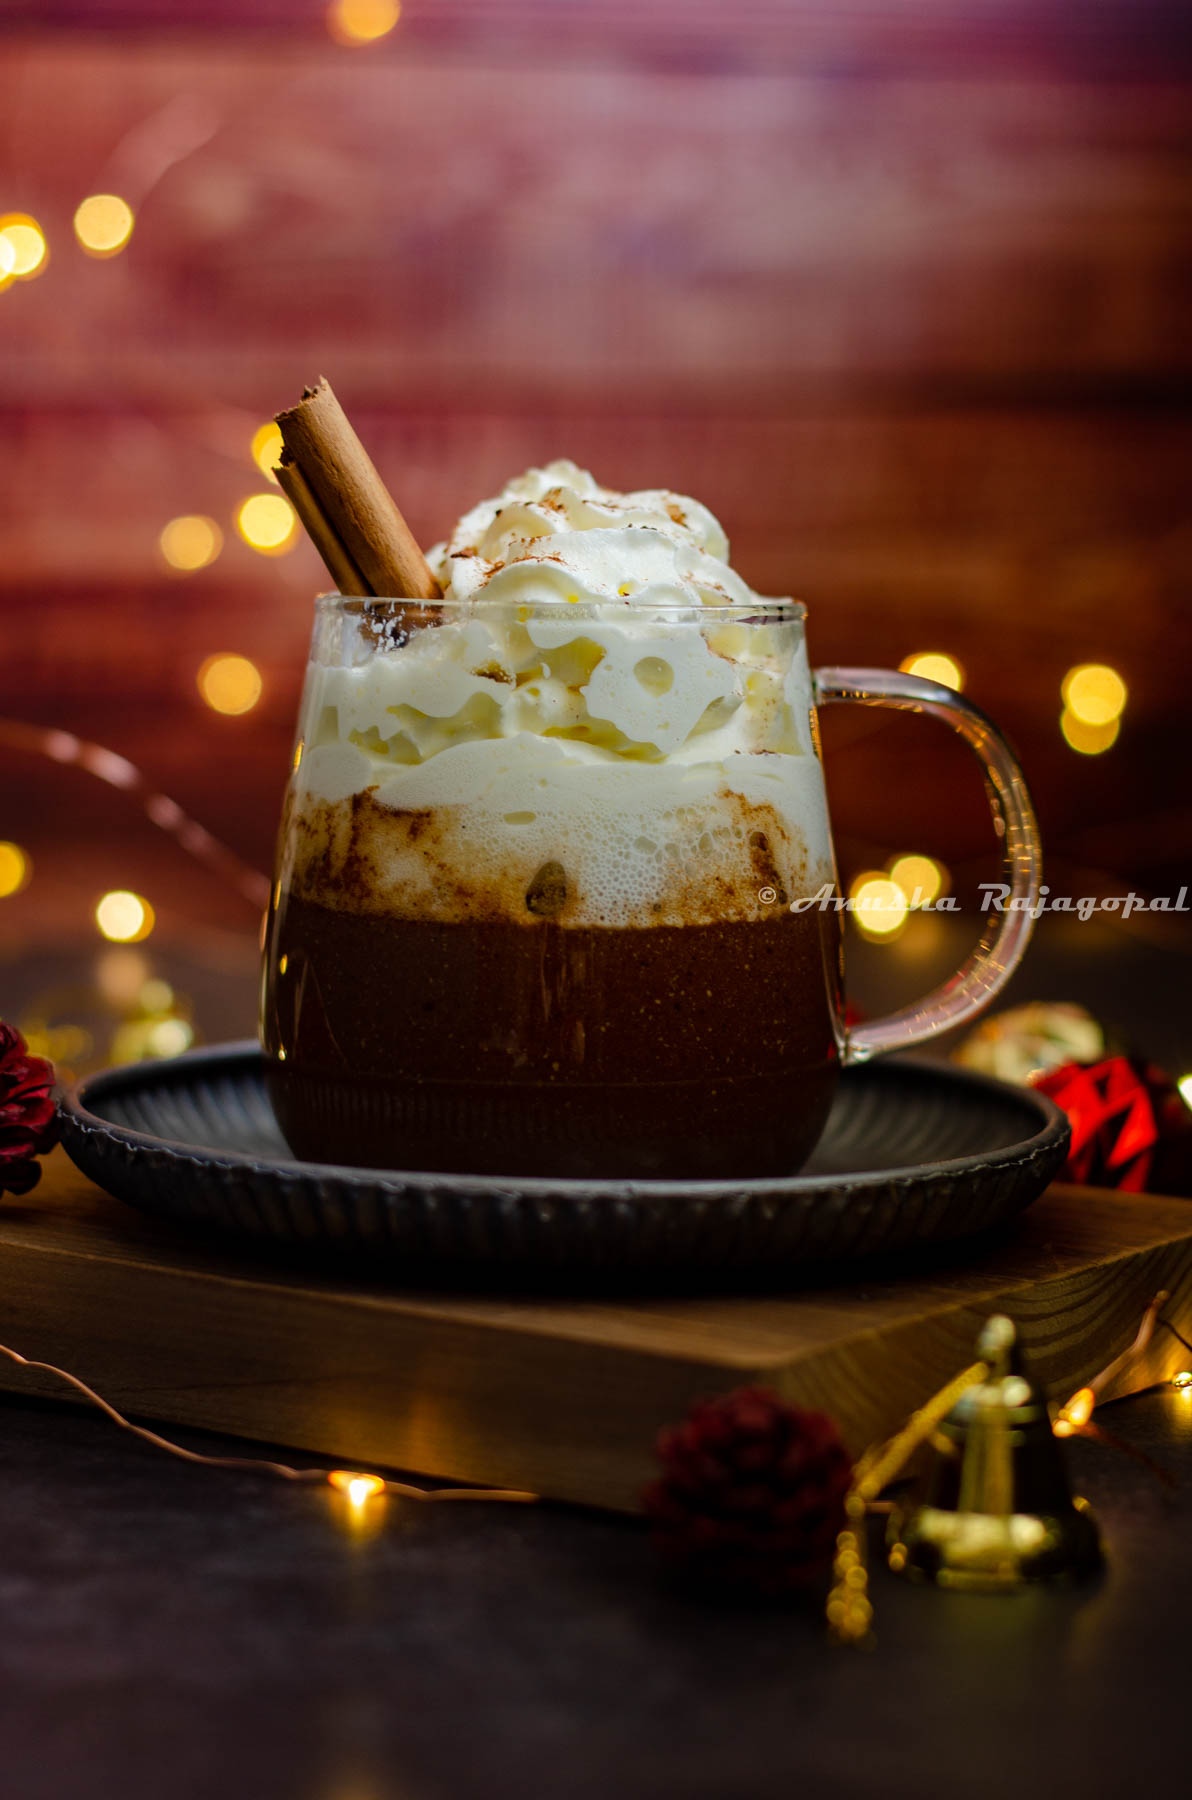 gingerbread flavored hot chocolate served in a glass mug with whipped cream topping and a sprinkle of ground cinnamon. Fairy lights and christmas tree decor surround the mug. Mug sits on a metal tray placed on a wooden board.